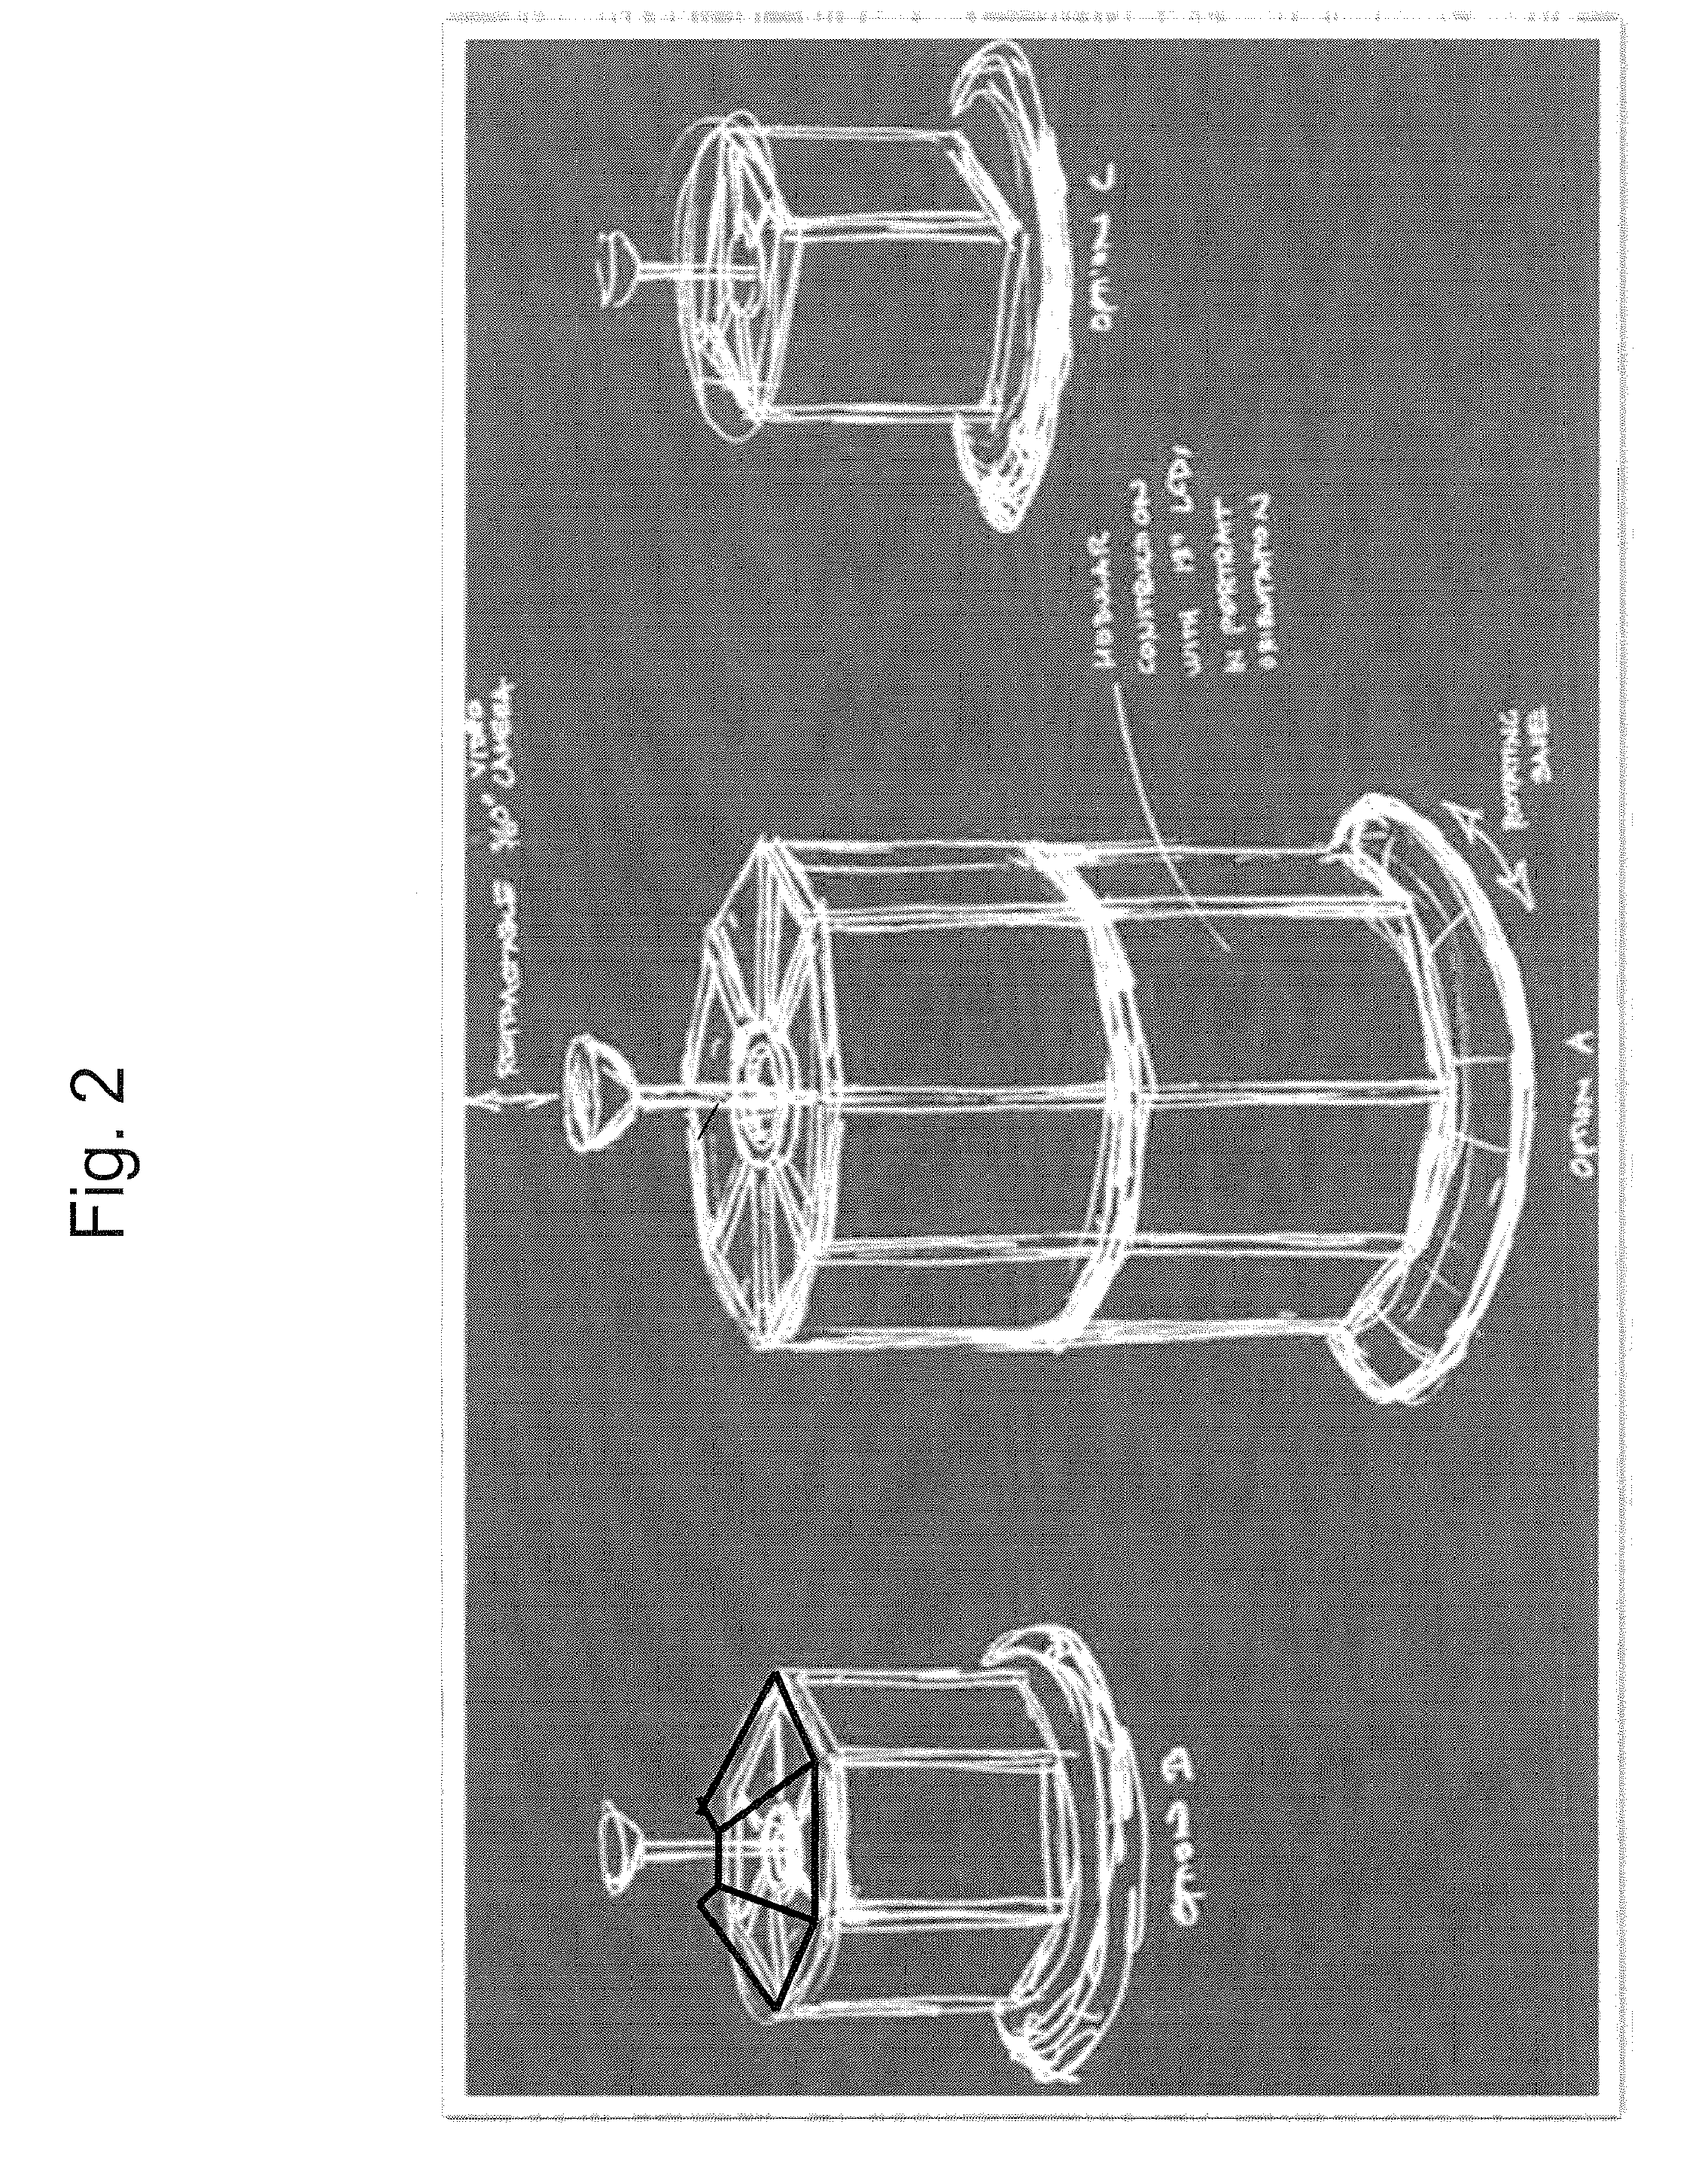 System and methods for facilitating collaboration of a group